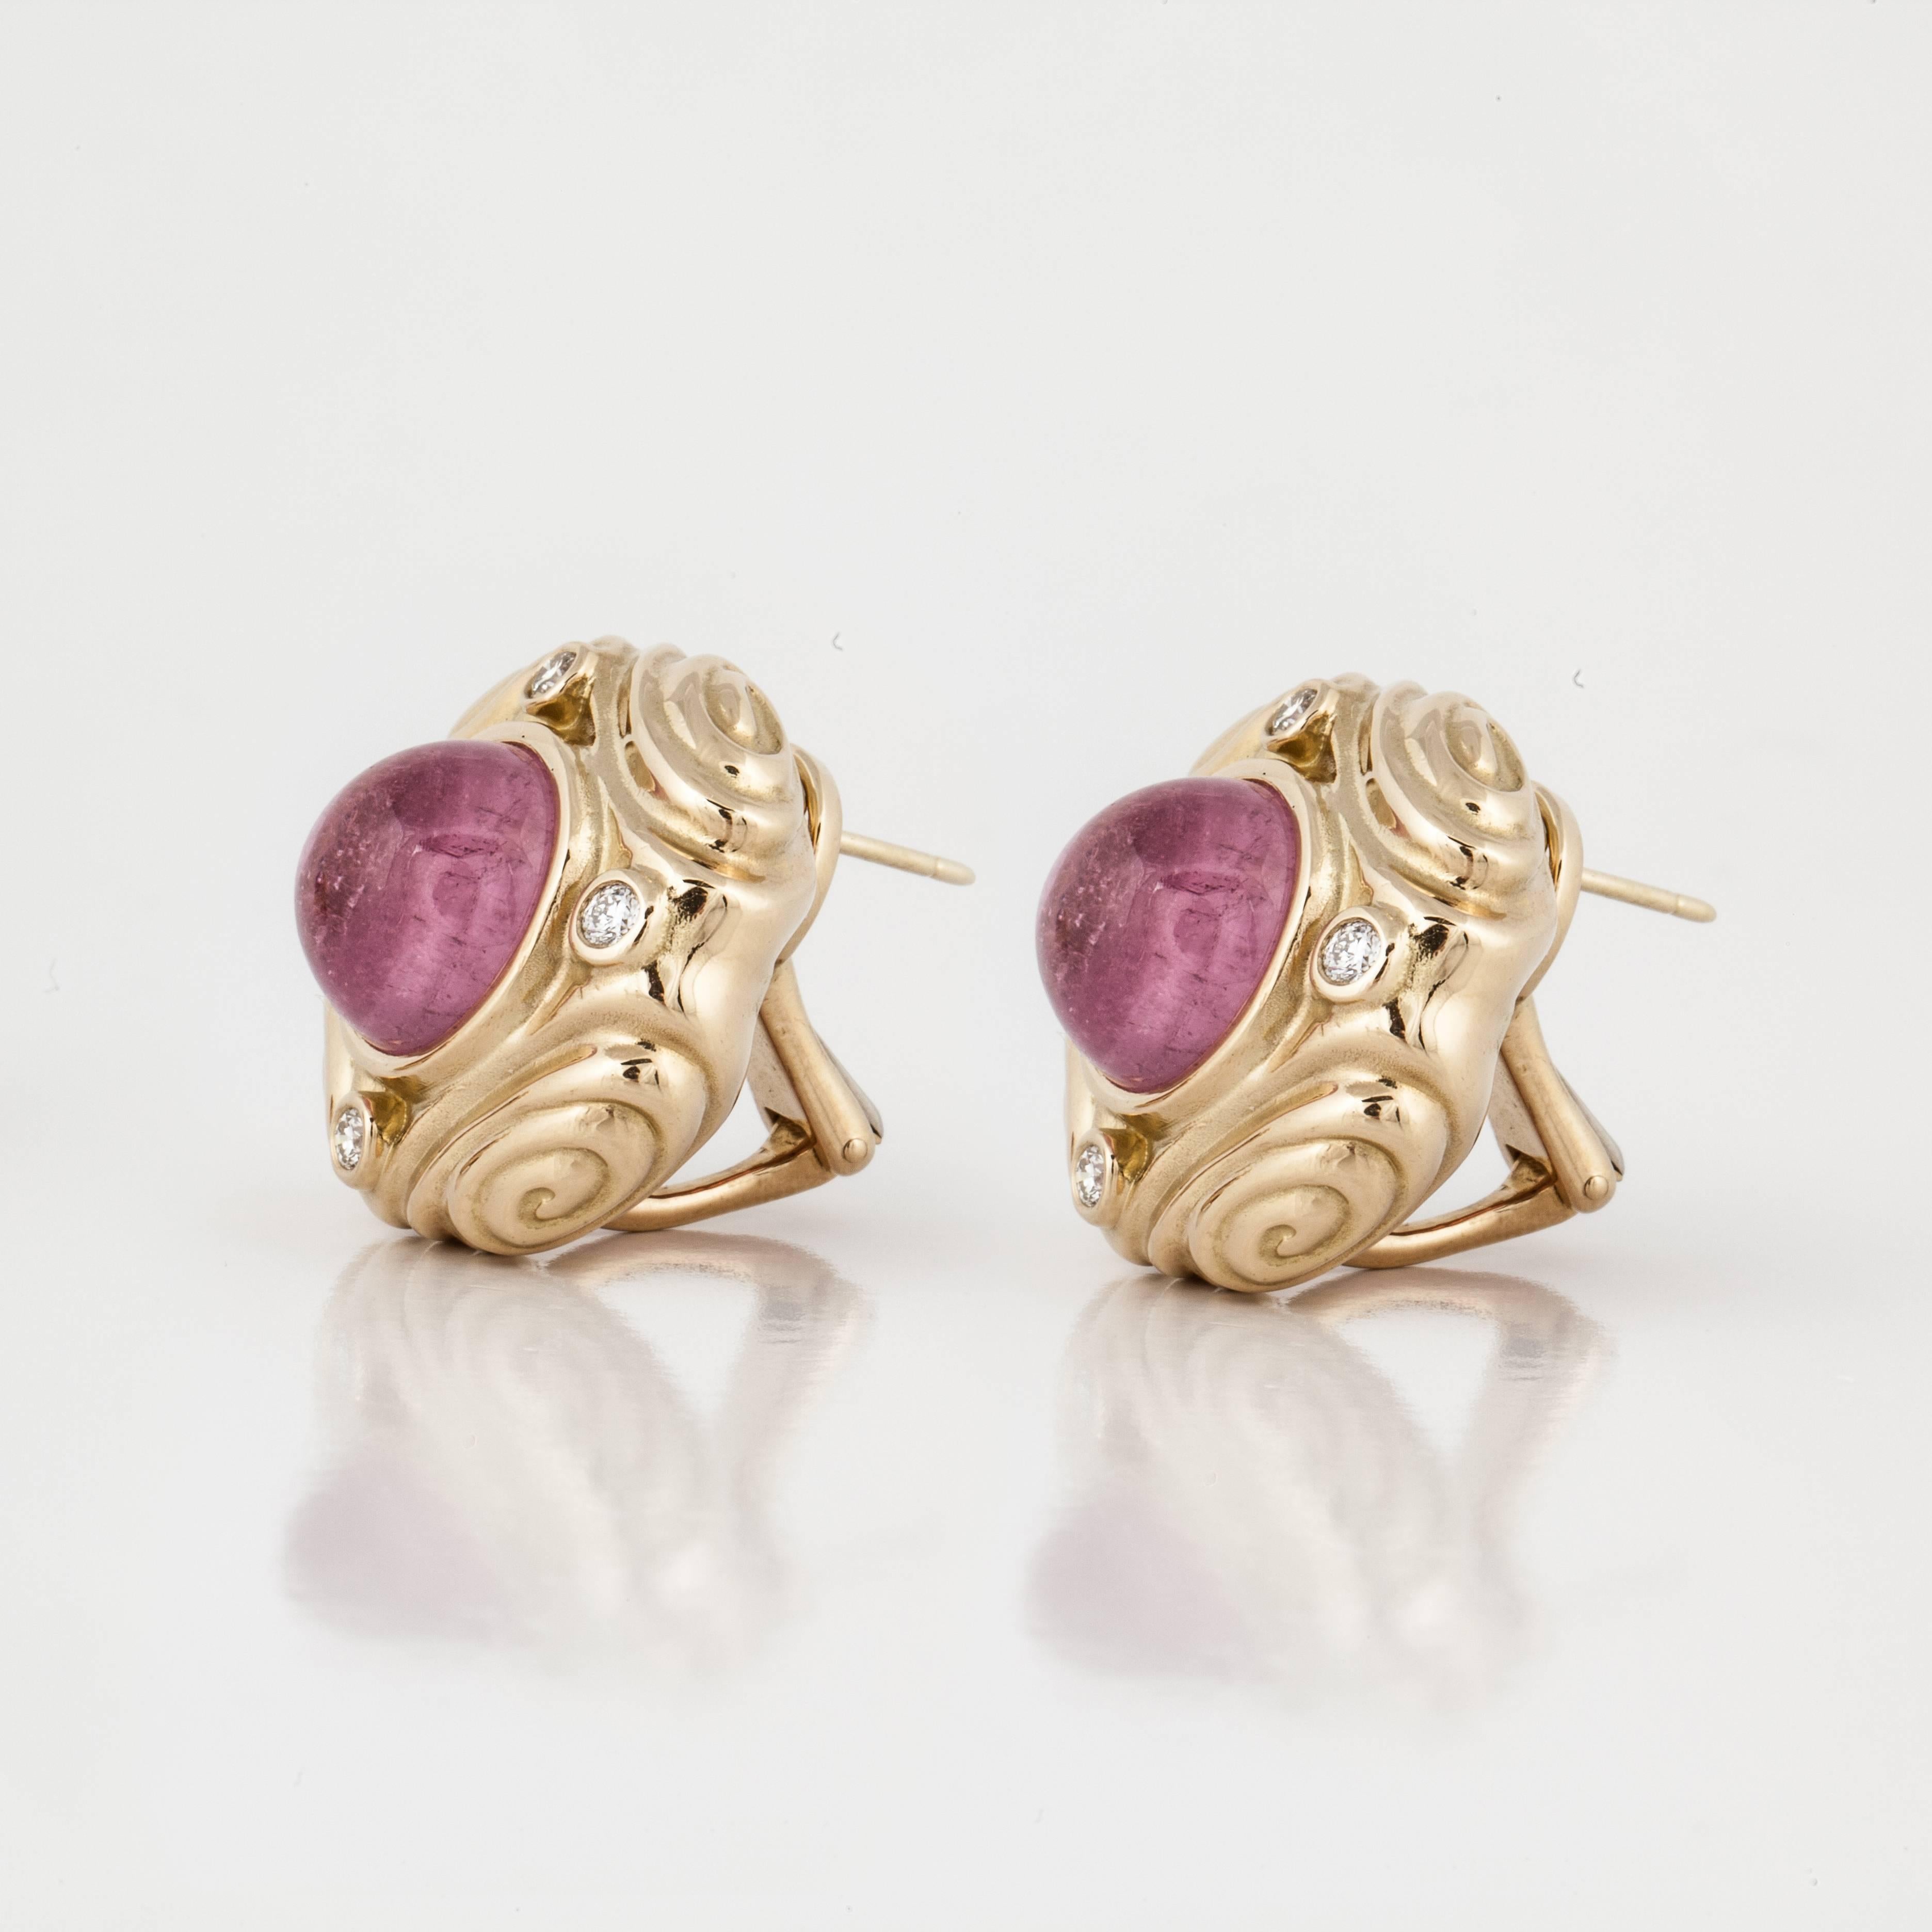 18K yellow gold button style earrings featuring cabochon pink tourmaline stones accented by round diamonds. There are eight round diamonds that total 0.60 carats. The earrings measure 7/8 inches wide, and have omega backs with posts.  They are